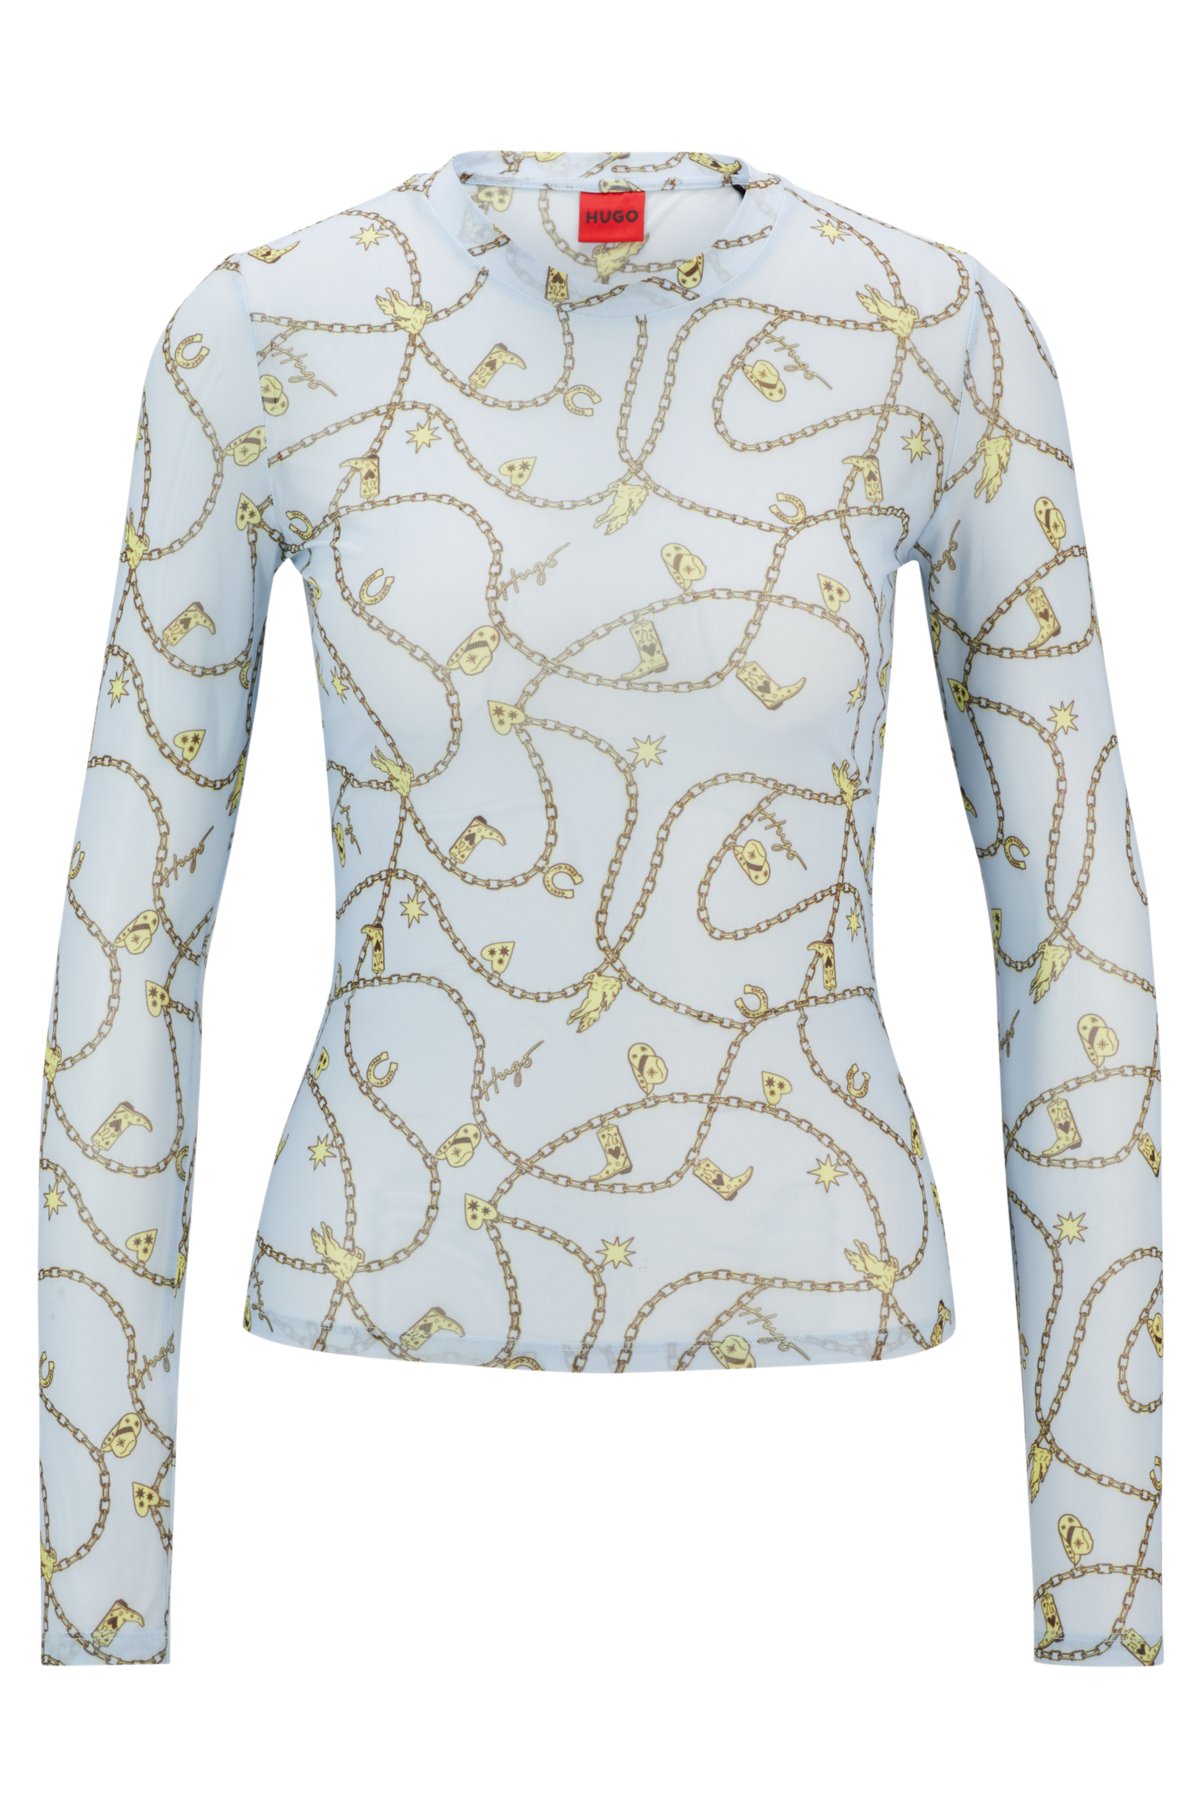 Long-sleeved top in stretch mesh with seasonal print, Patterned